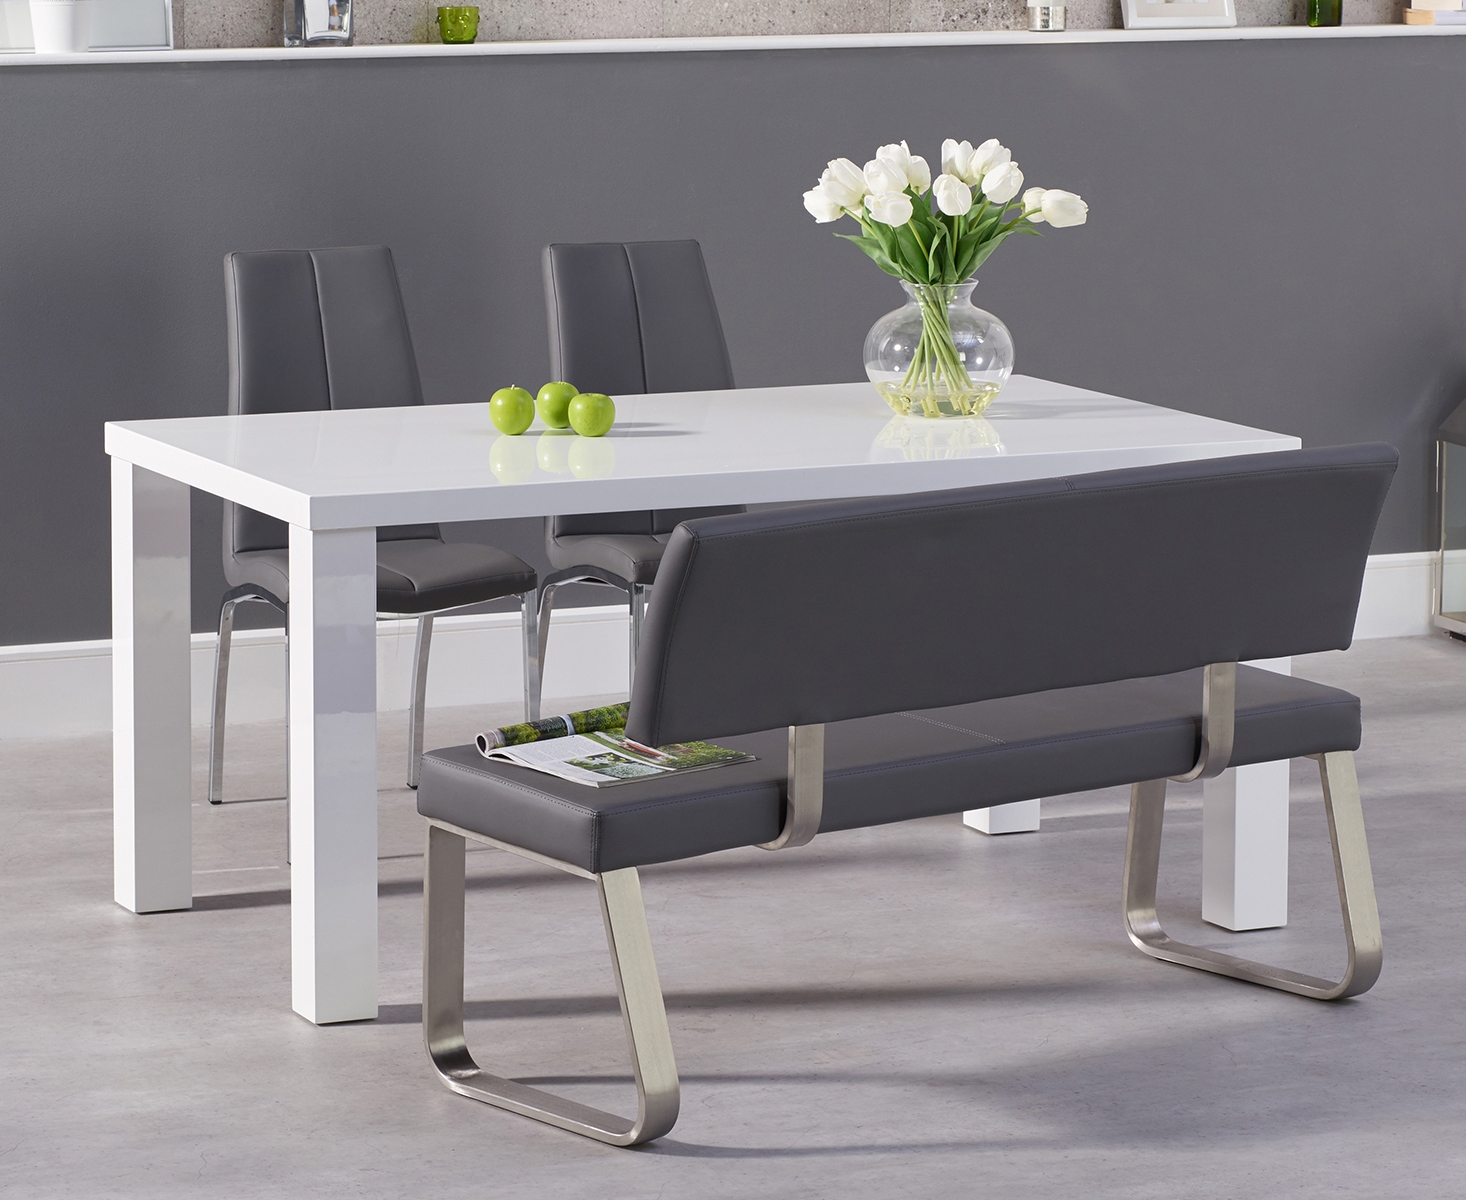 Photo 1 of Seattle 160cm white high gloss dining table with 2 grey marco chairs with 1 grey bench